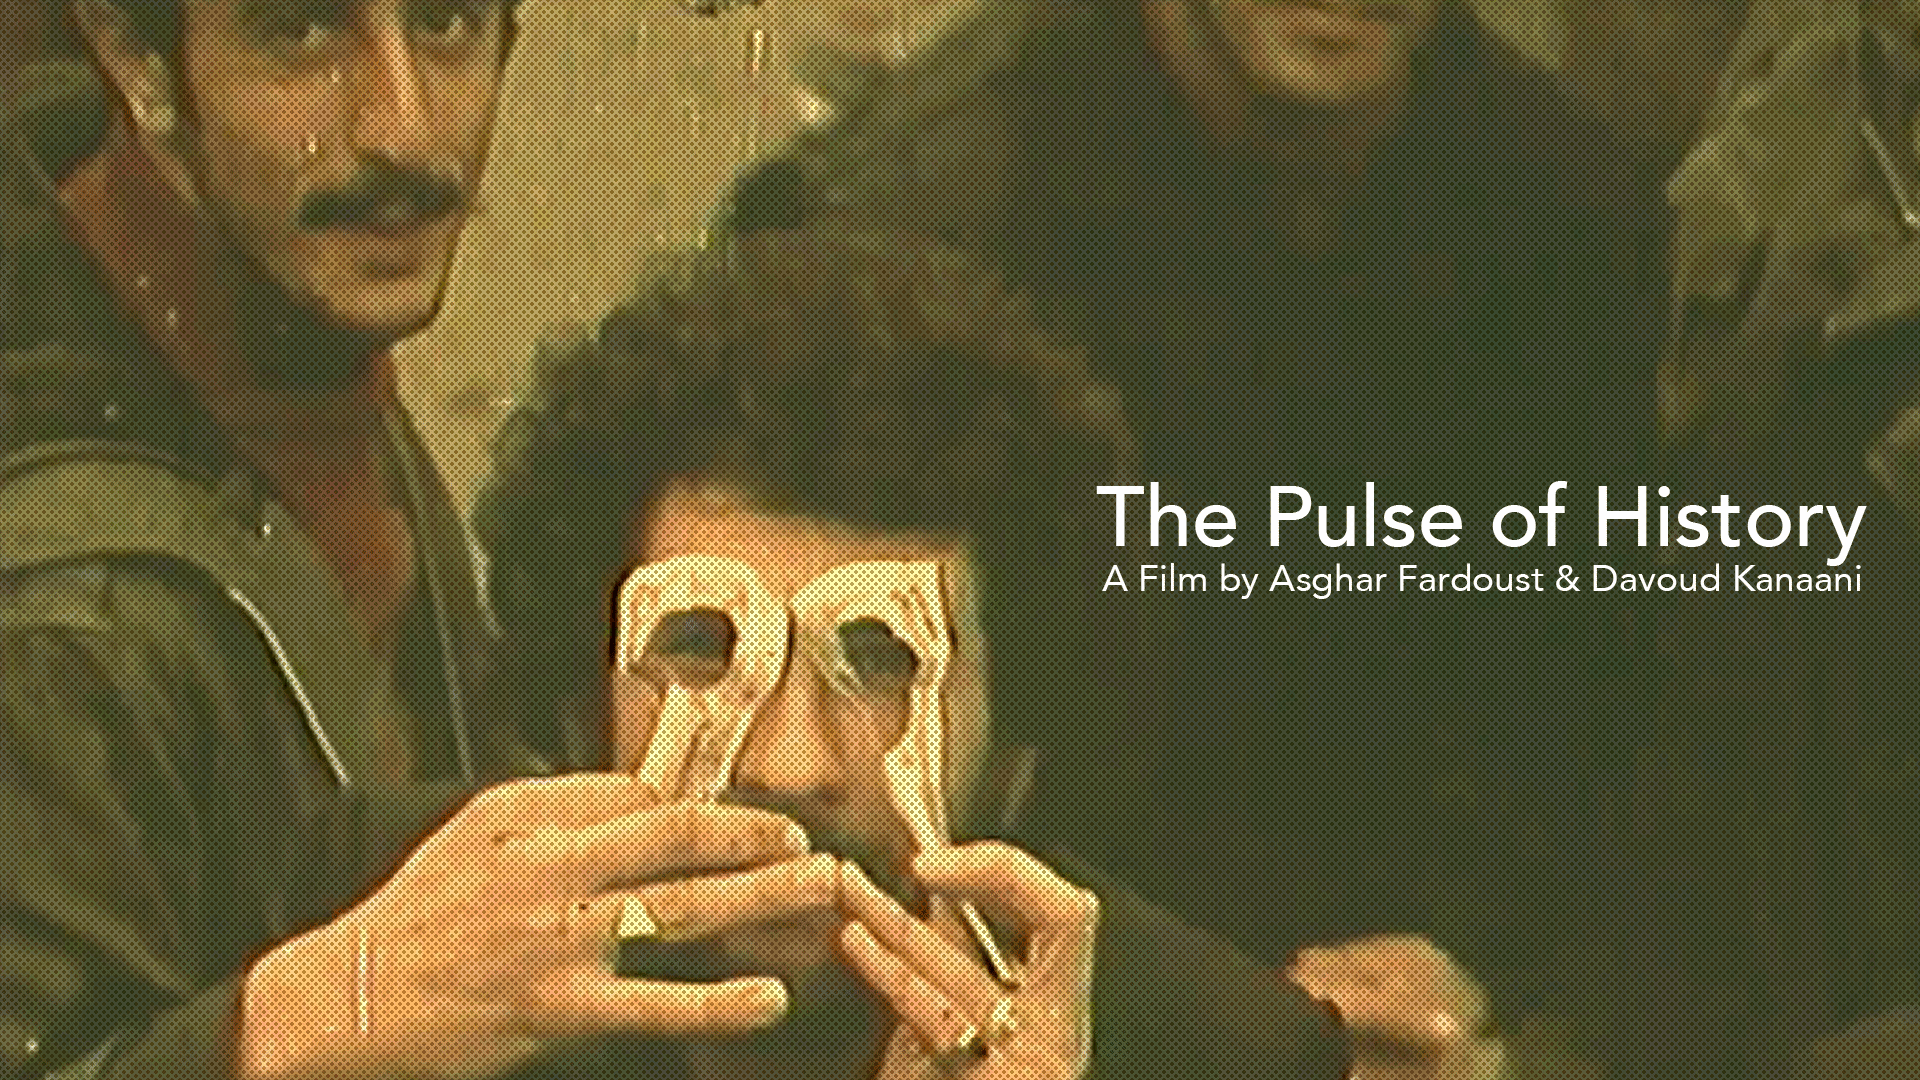 The Pulse of History (1979)